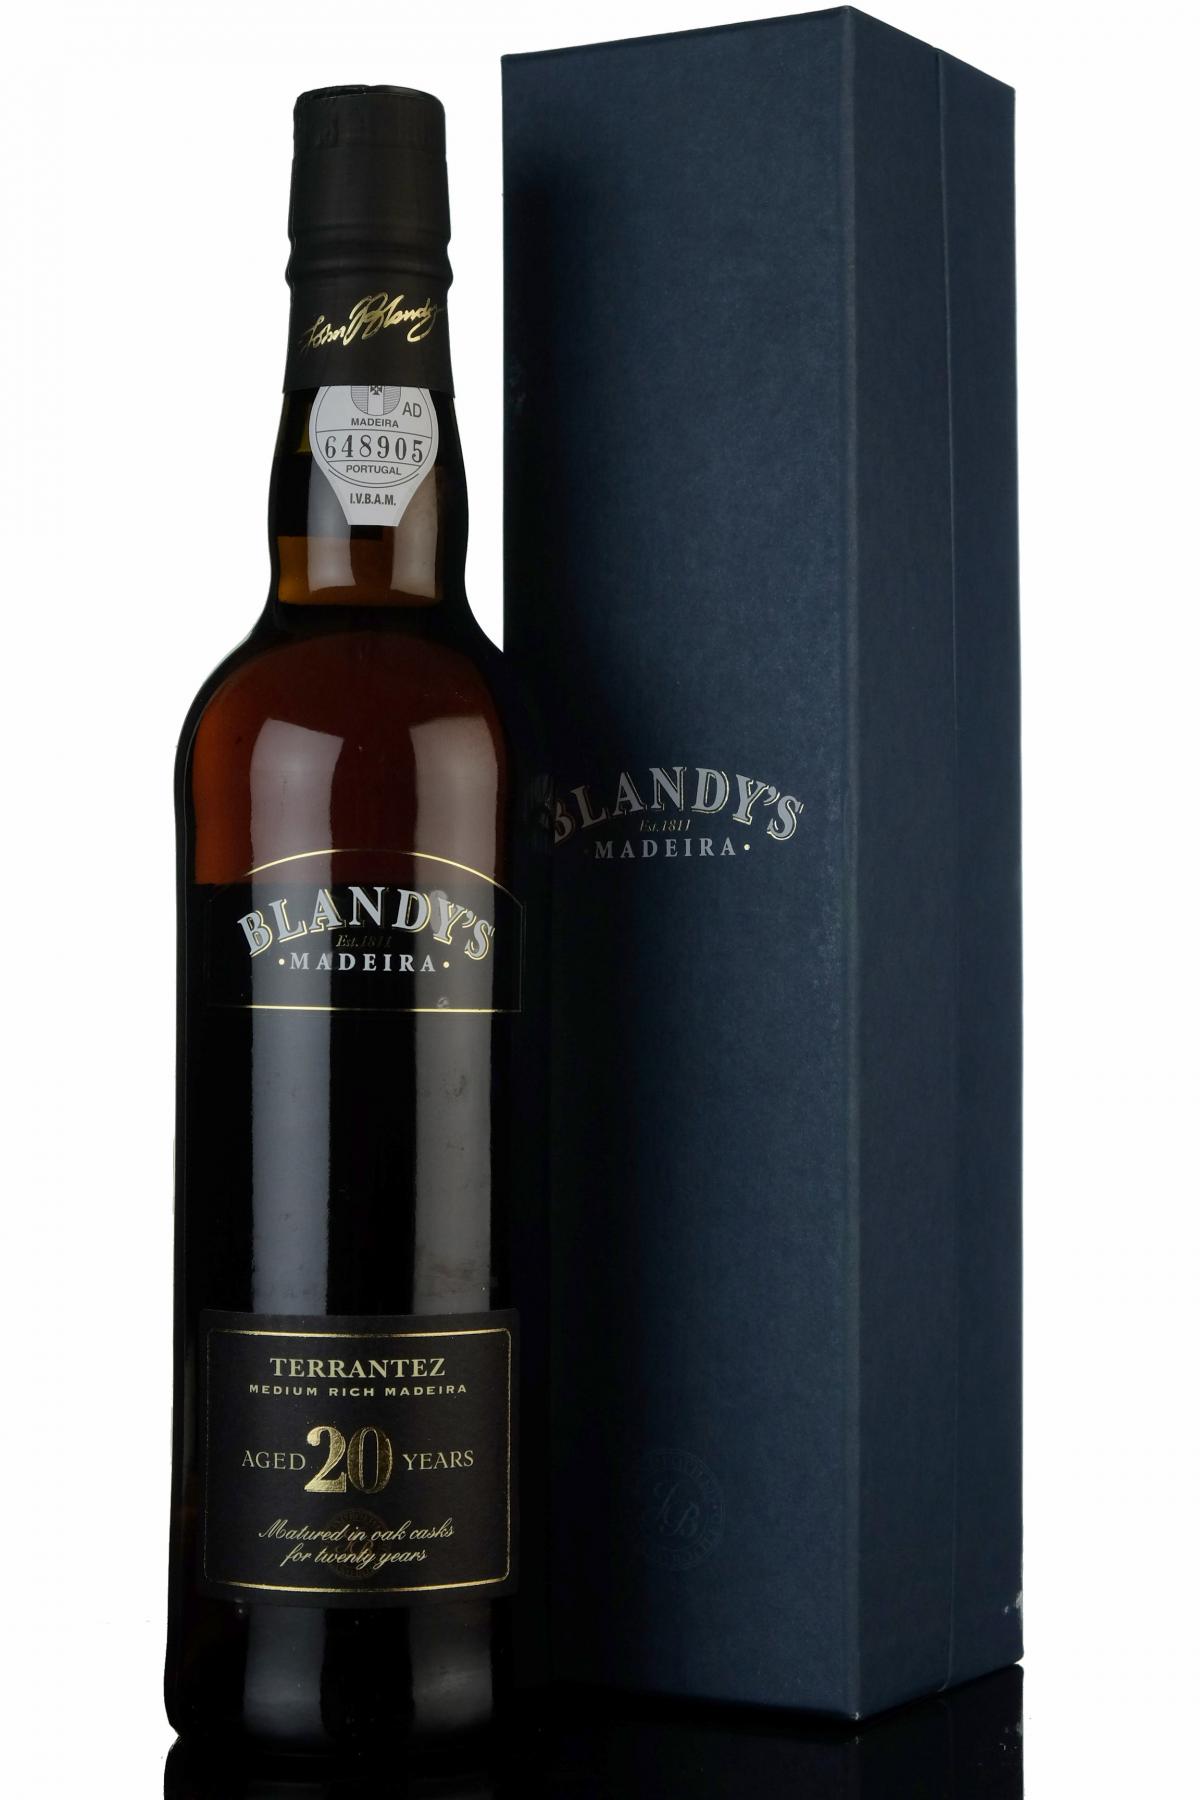 Blandys 20 Year Old - Madeira Wine - 50cl